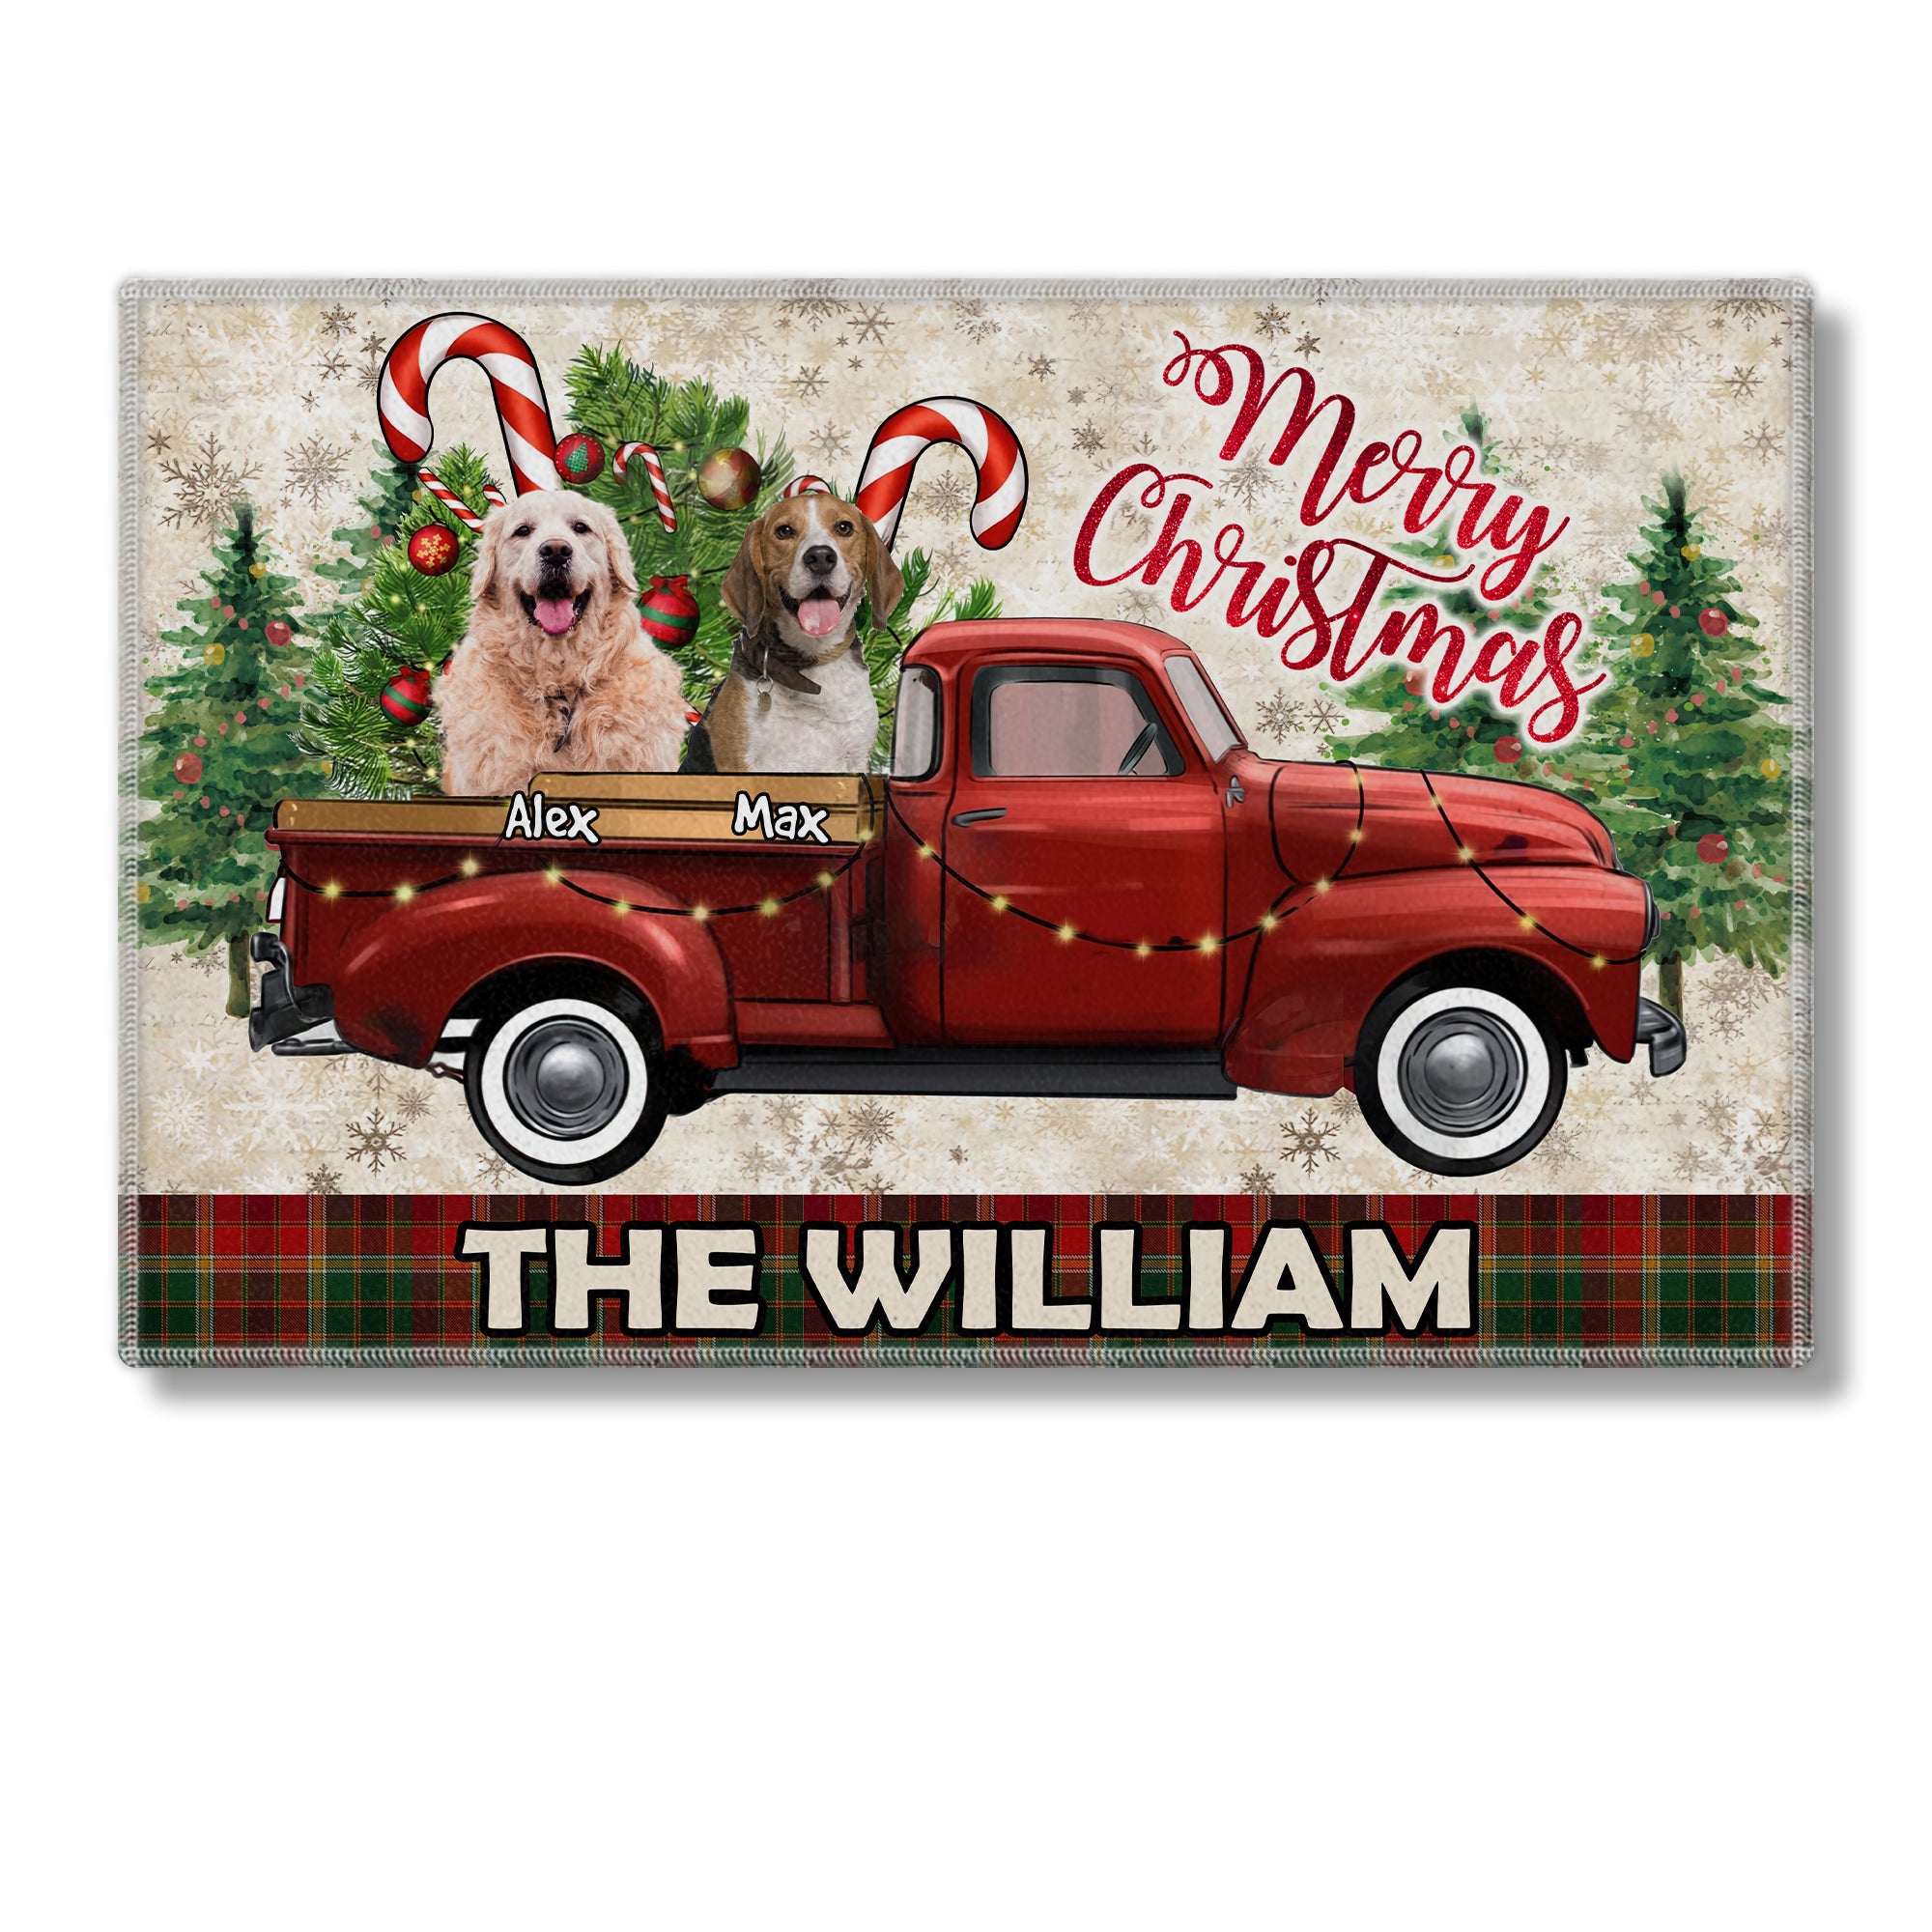 Merry Christmas  - Custom Photo And Name - Personalized Doormat - Pet Lover Gift